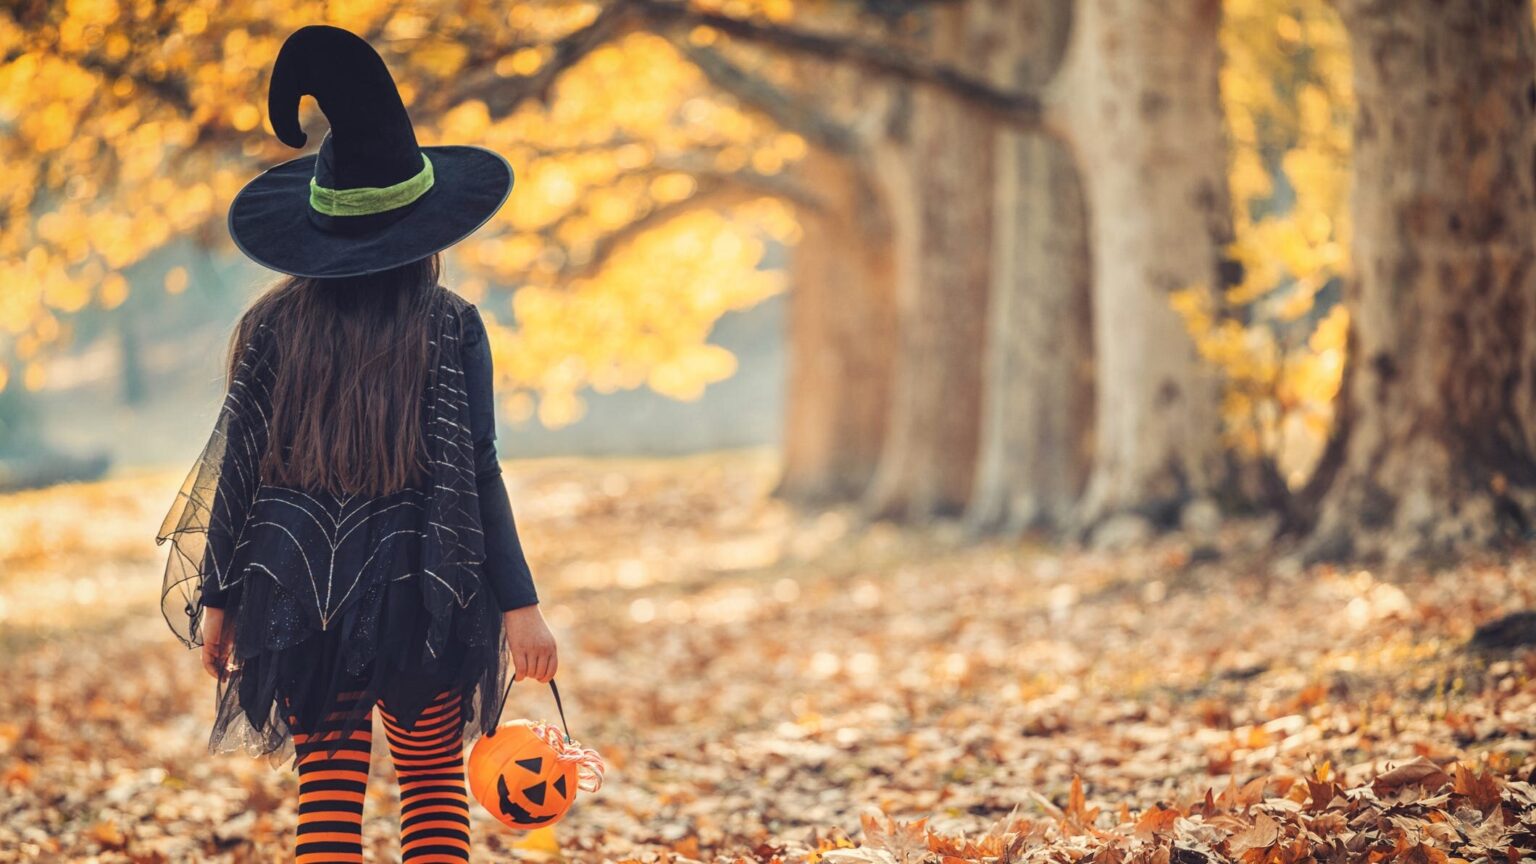 Looking for a quick and easy Halloween costume for this year? We have some suggestions for simple and fun outfits you can put together.